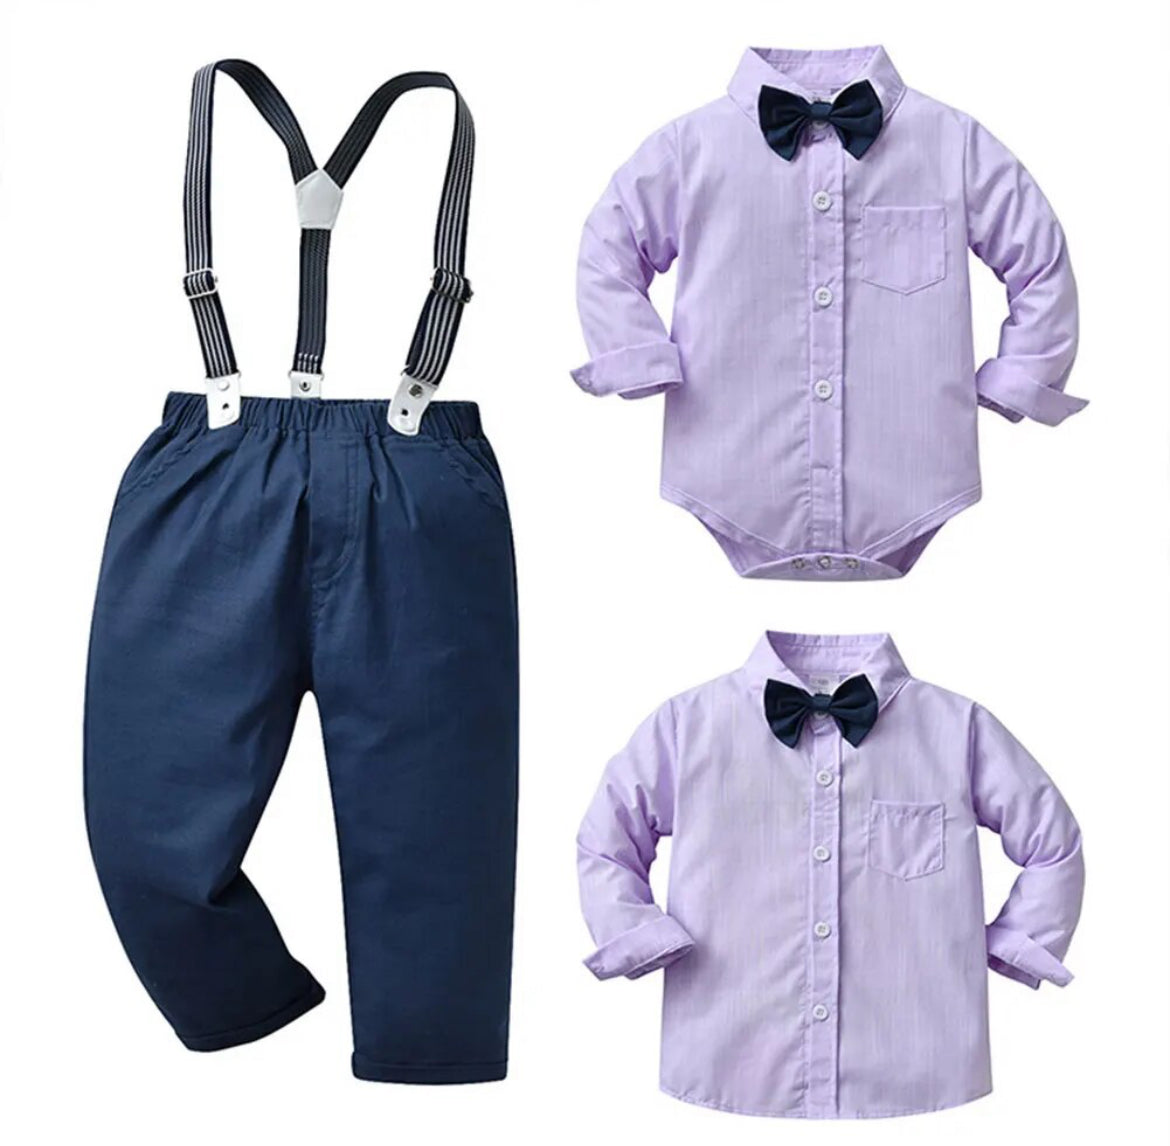 Baby Boys Gentleman Outfit Suit,  Long Sleeve, Suspenders Pants Bow Tie Clothes Set